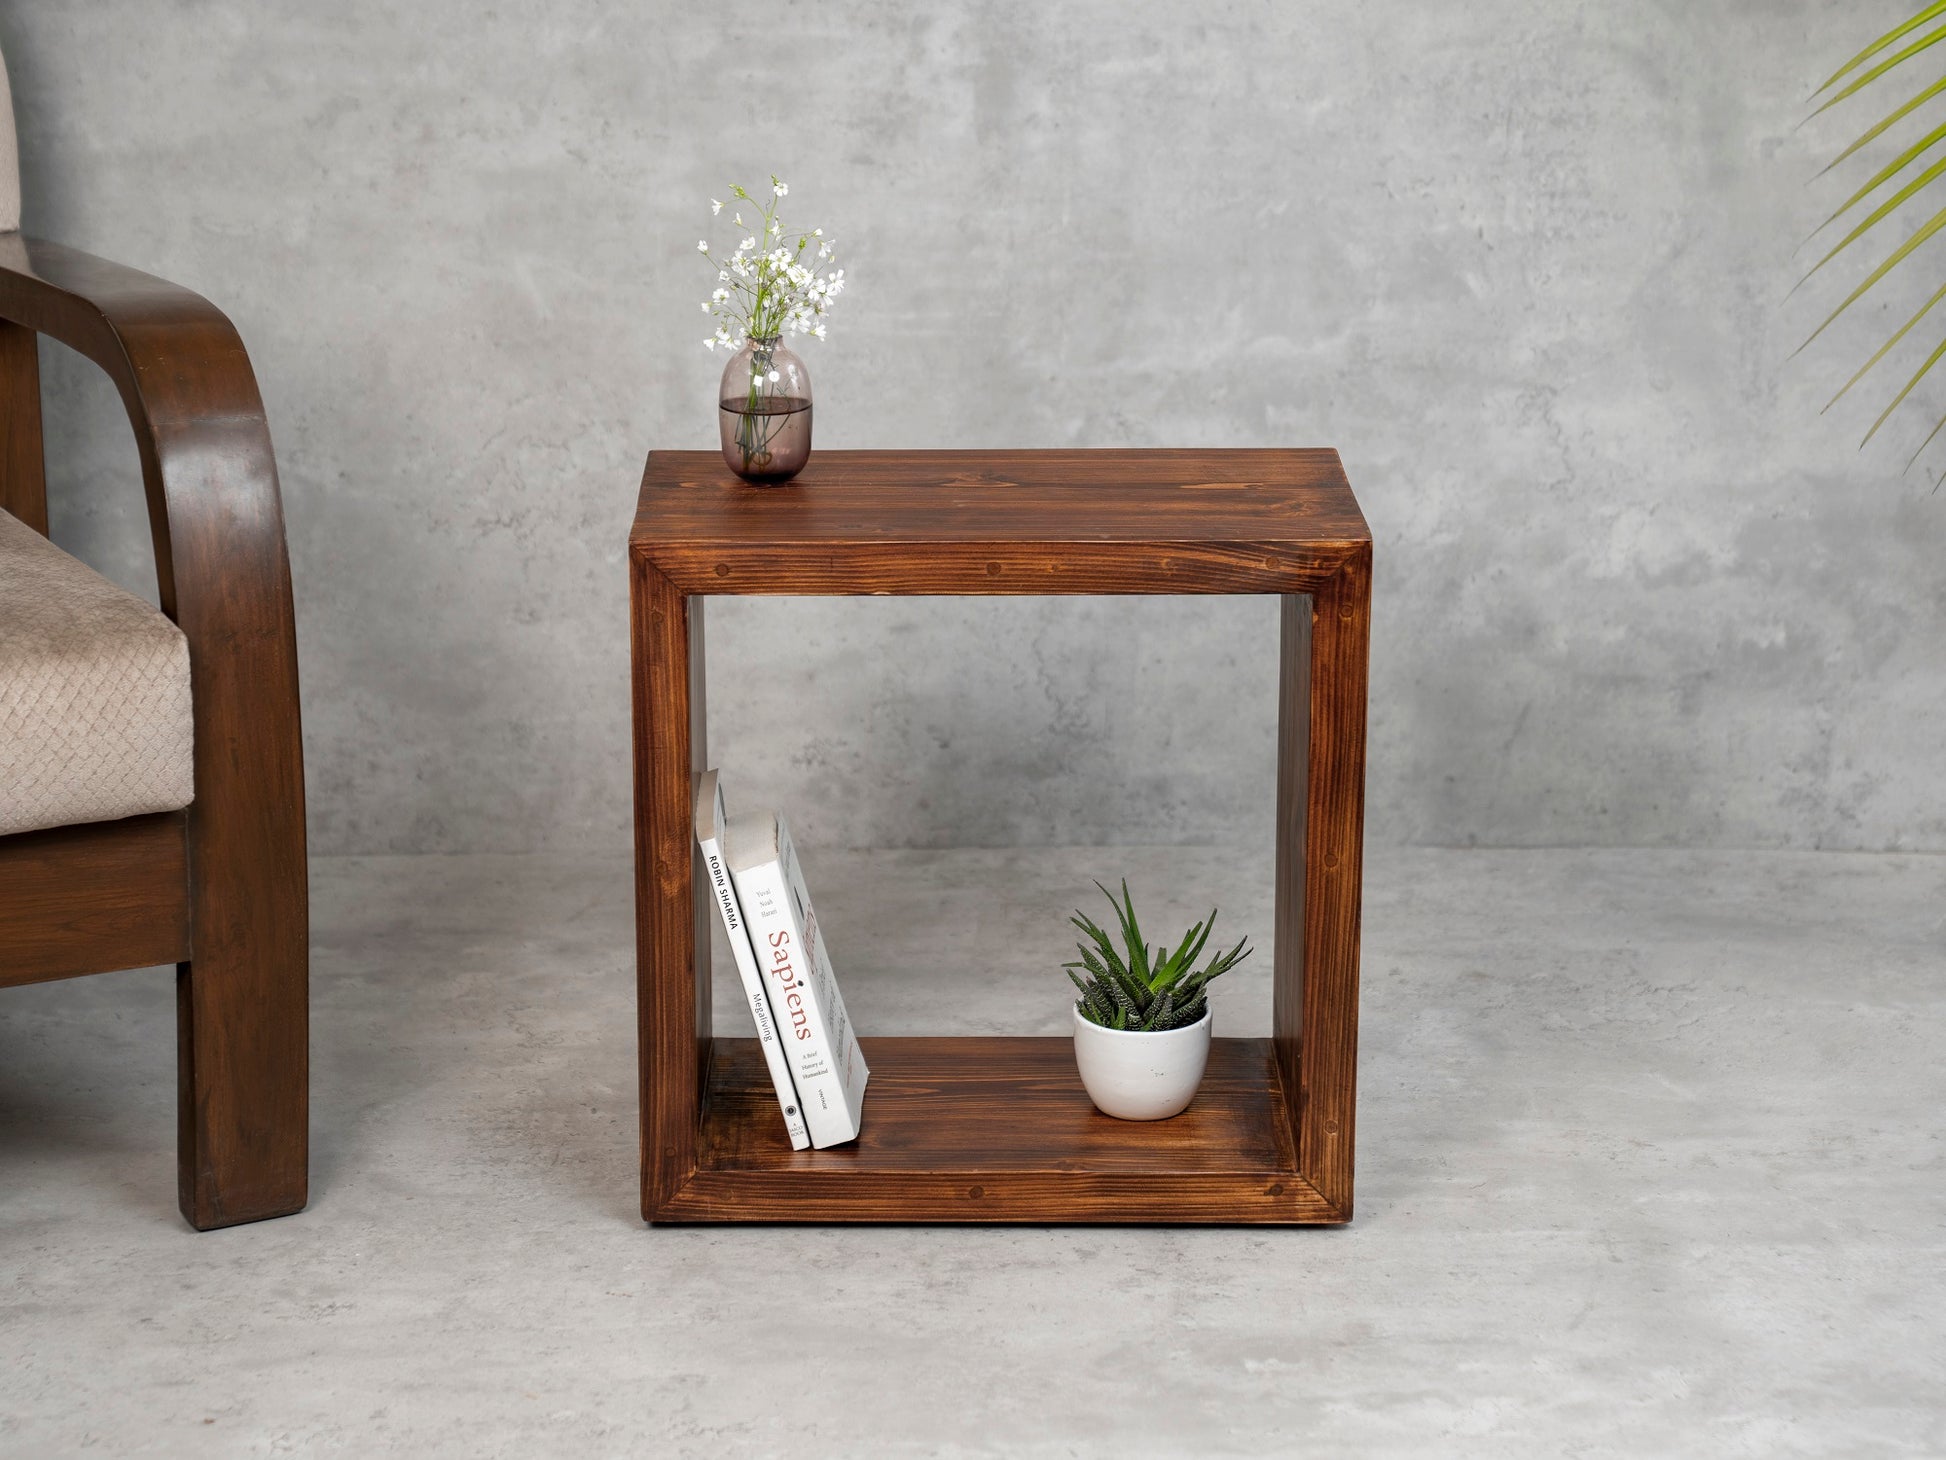 Side Table, Wooden End Table, Living Room Decor, Wooden Side Table, Living Room Table